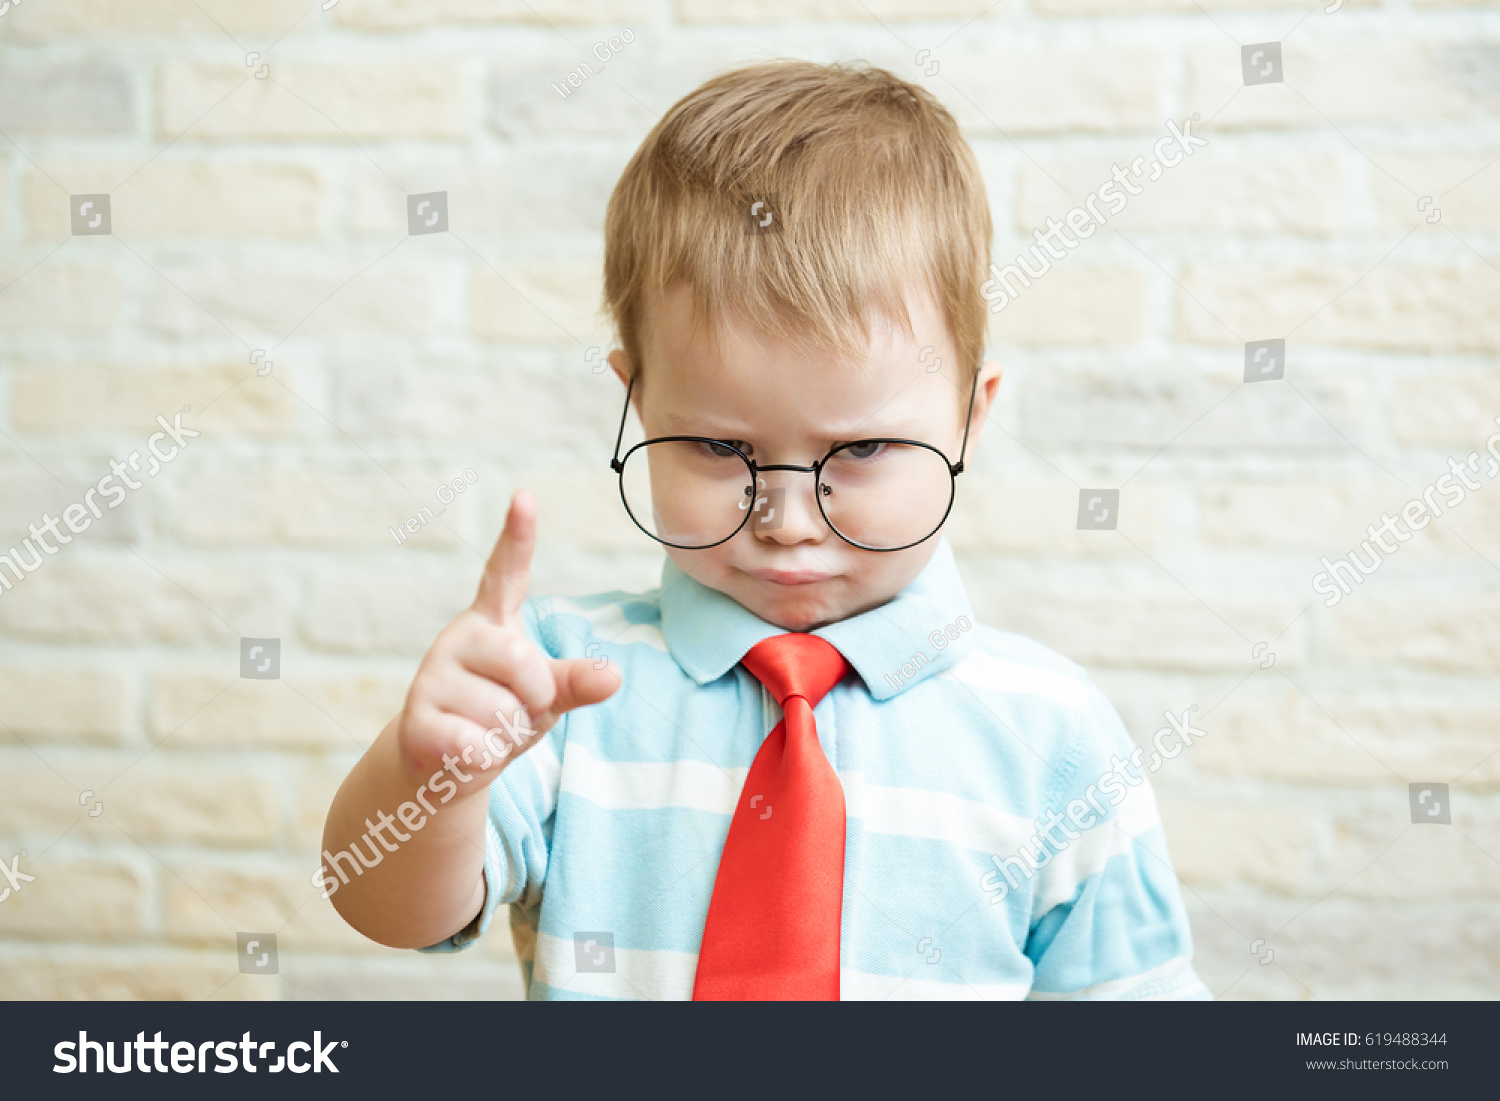 Serious boy standing with a finger in big glasses. The concept of the evil boss. #619488344